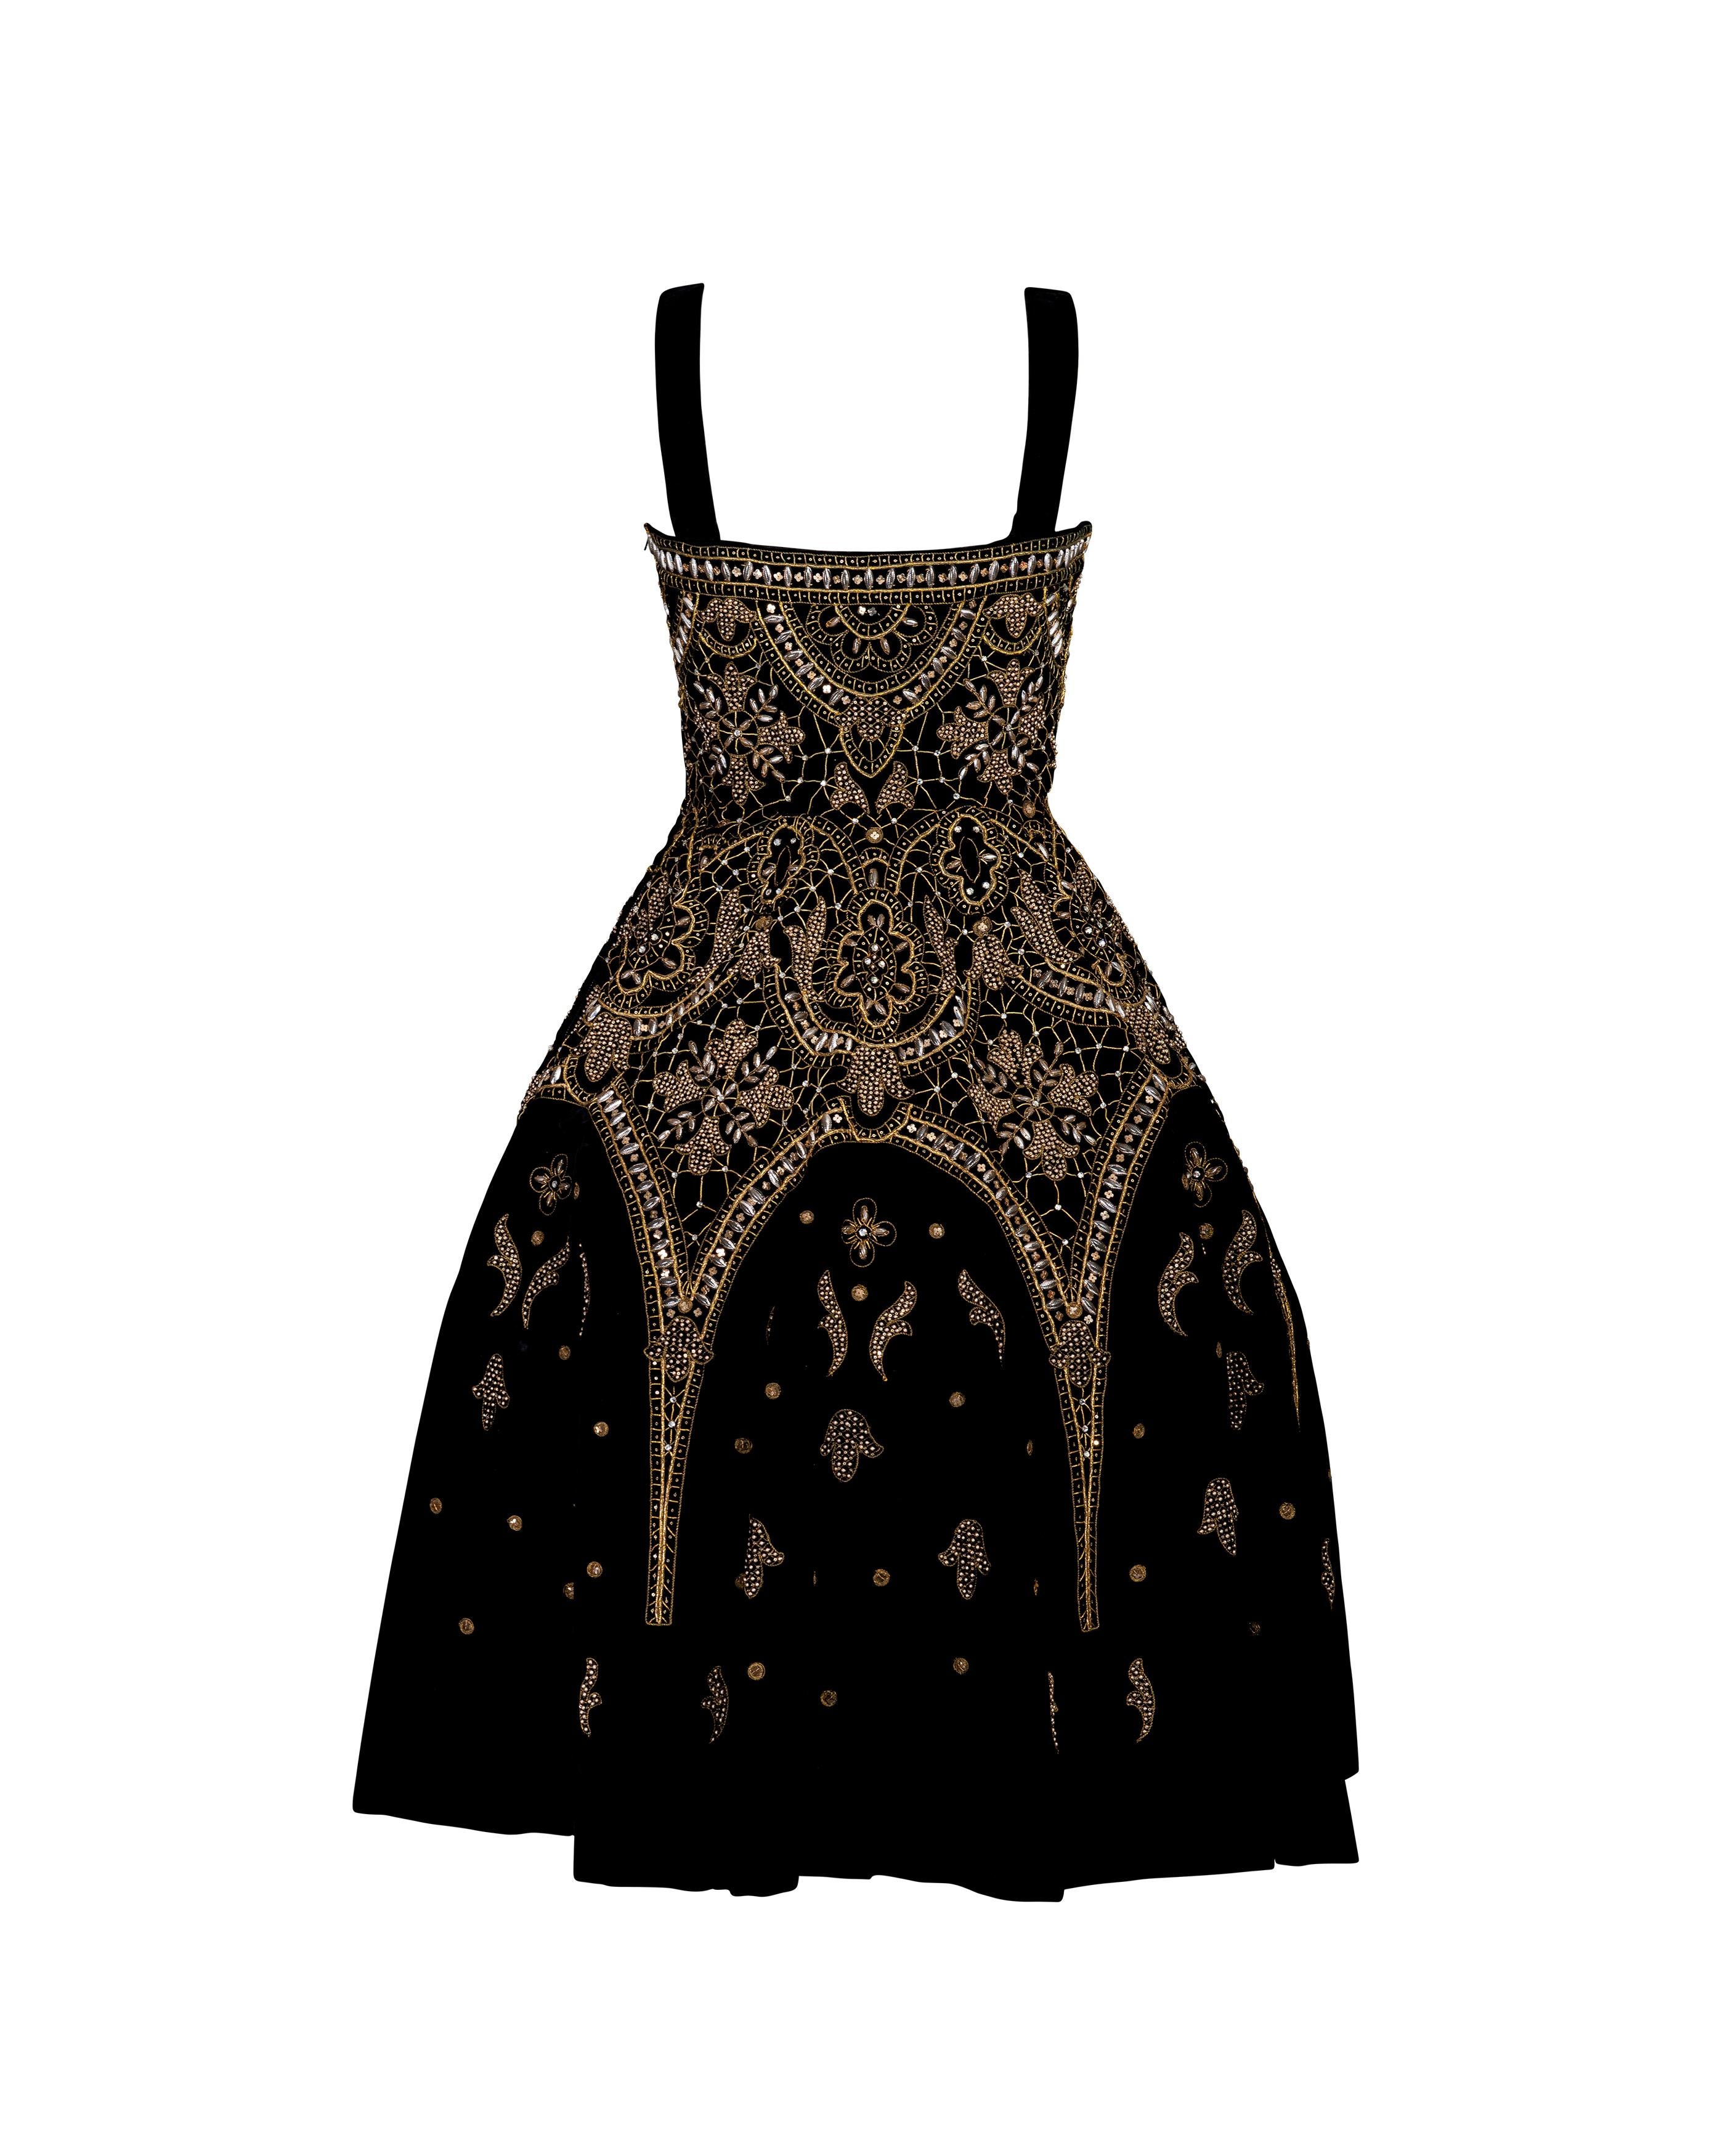 A/W 1956 Jeanne Lanvin Haute Couture Black and Gold Embroidered Velvet Dress For Sale 1